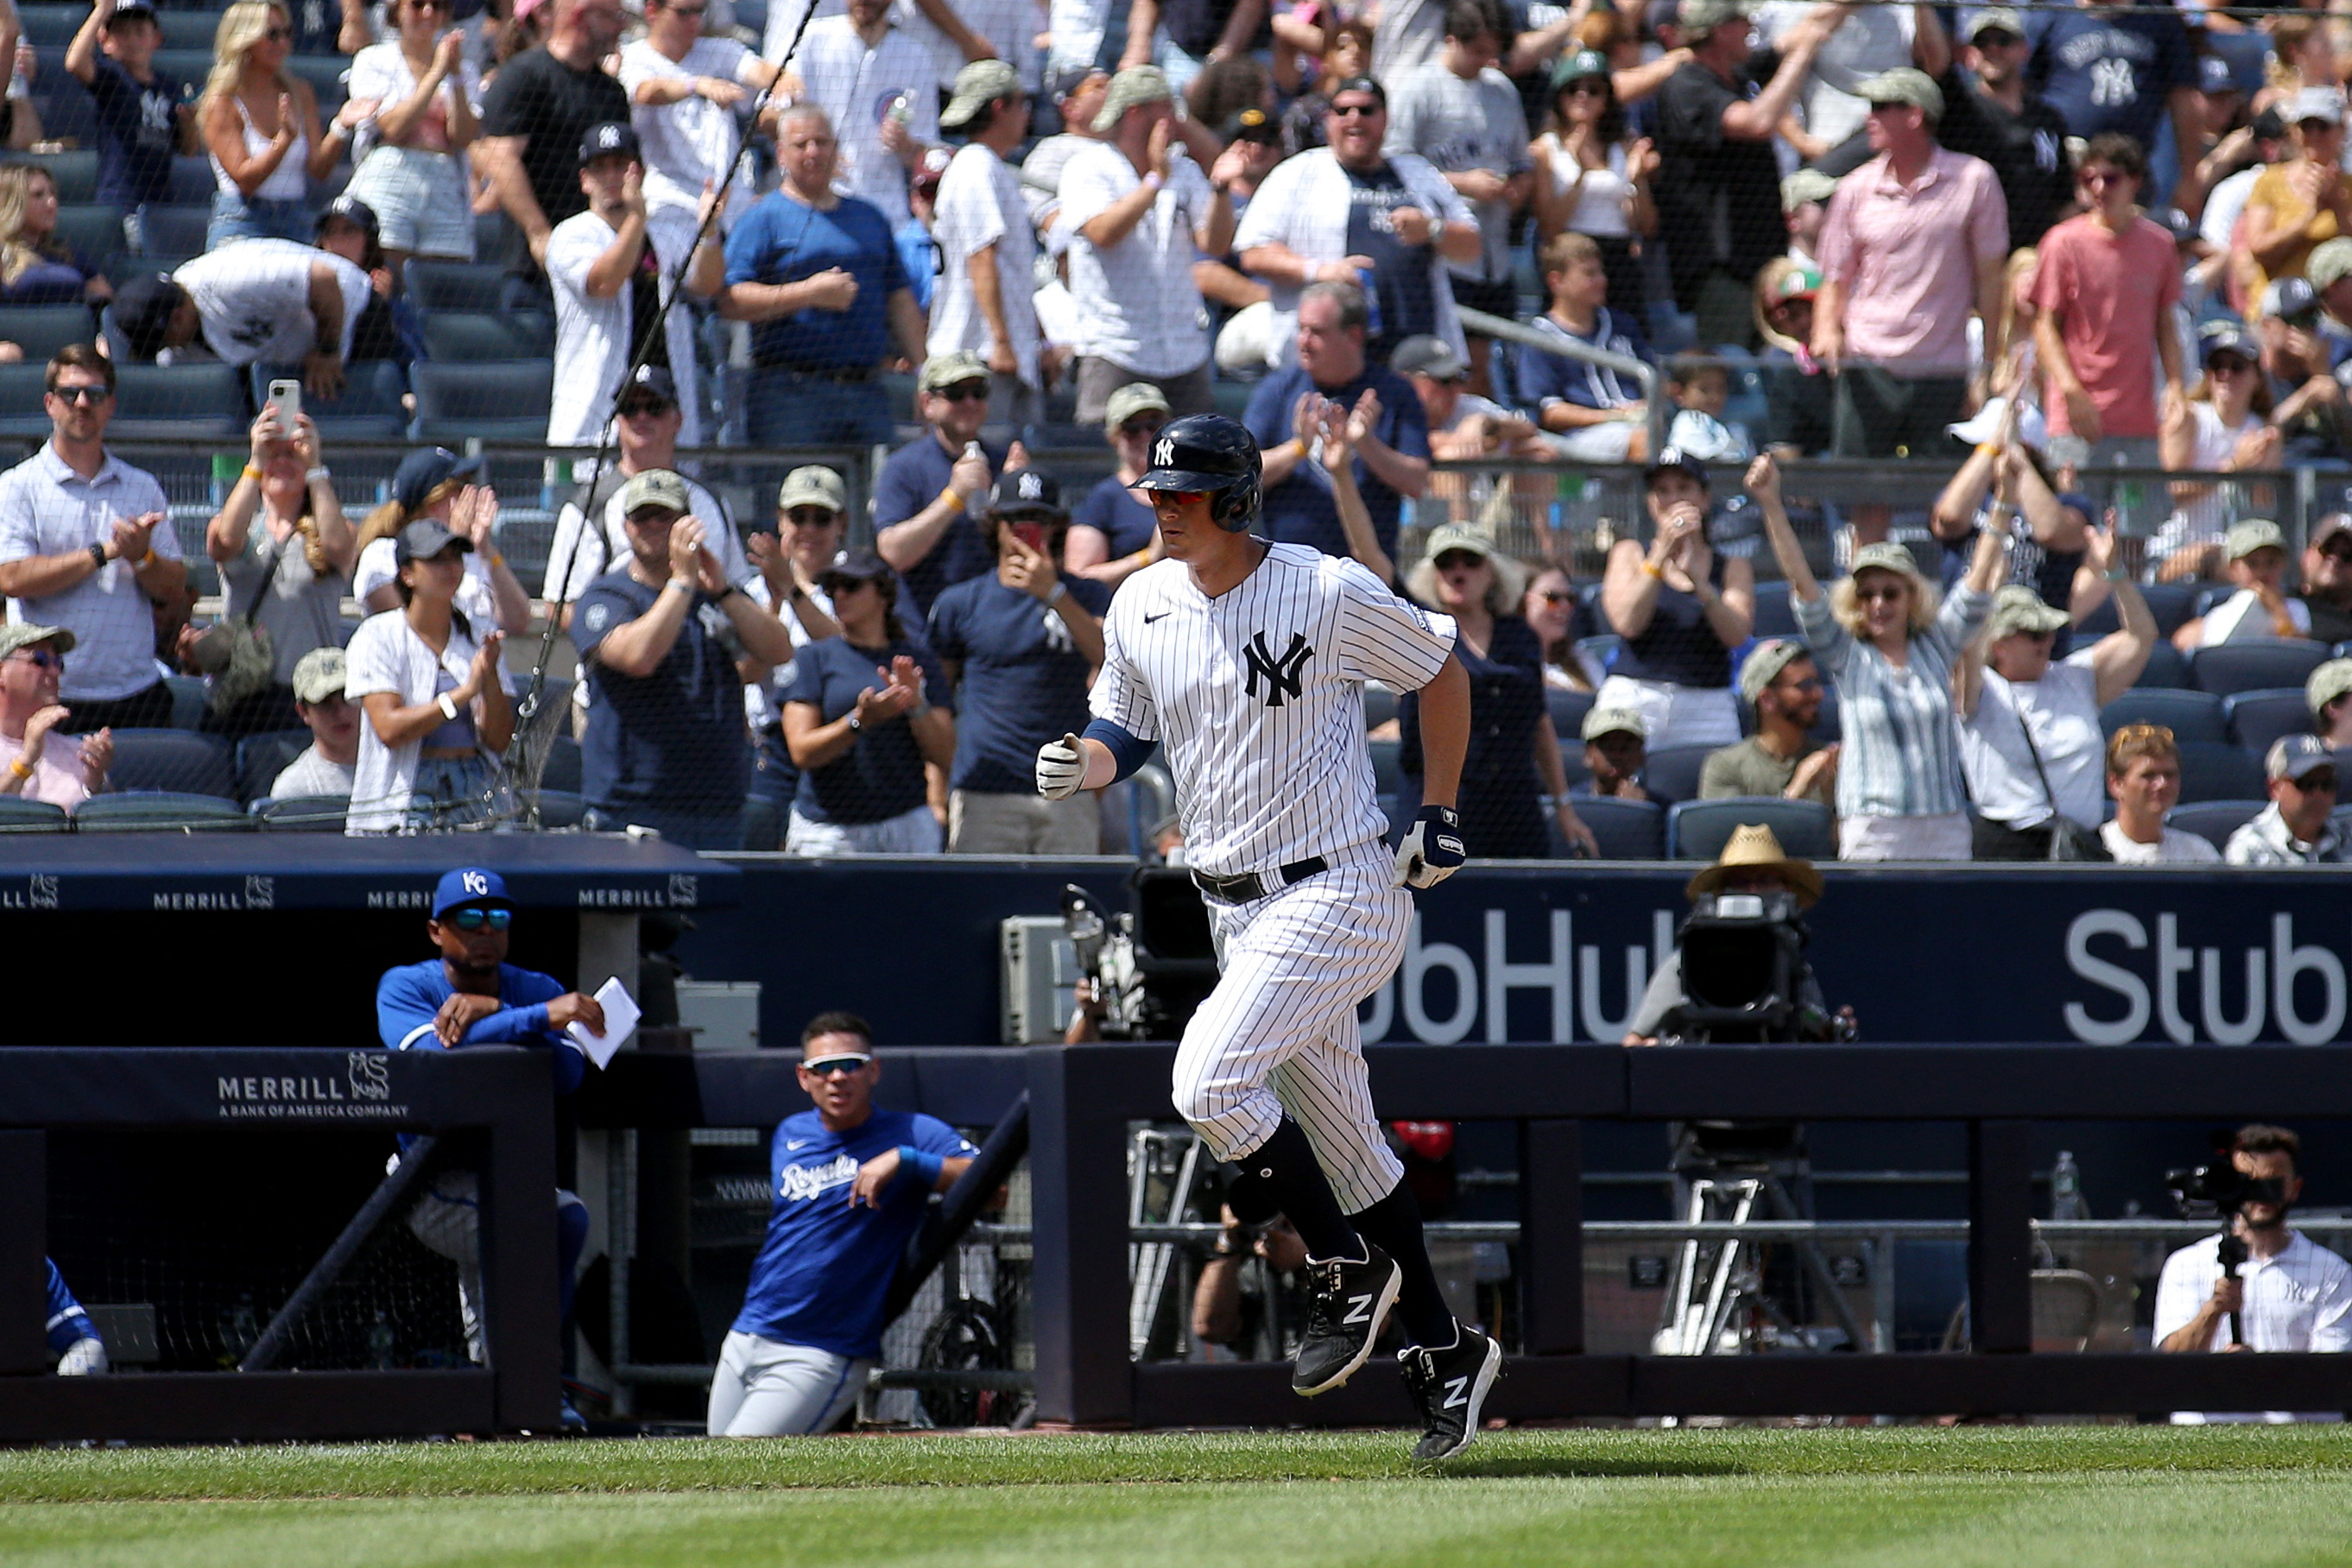 LeMahieu and Stanton homer as the Yankees beat the Royals 5-2. Cole strikes  out 10